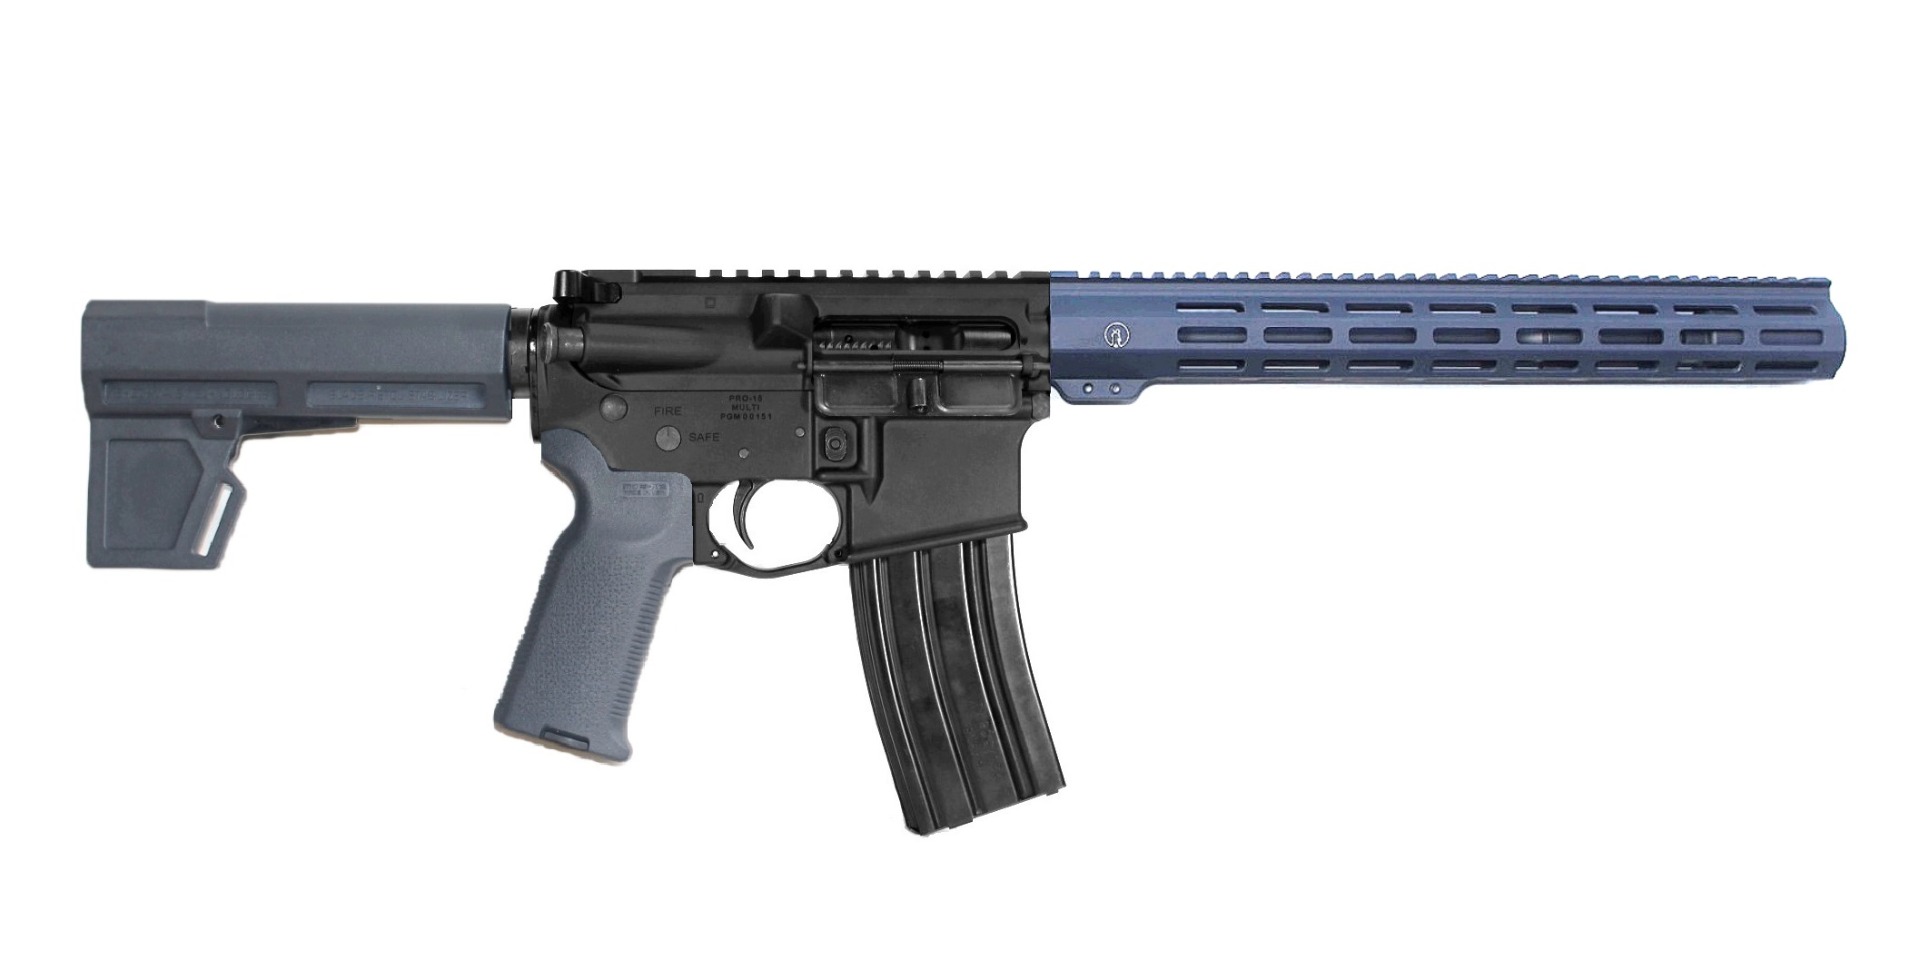 P2A PATRIOT 12.5" 5.56 NATO 1/7 Mid Length Melonite M-LOK Pistol with Flash Can - BLK/GRAY